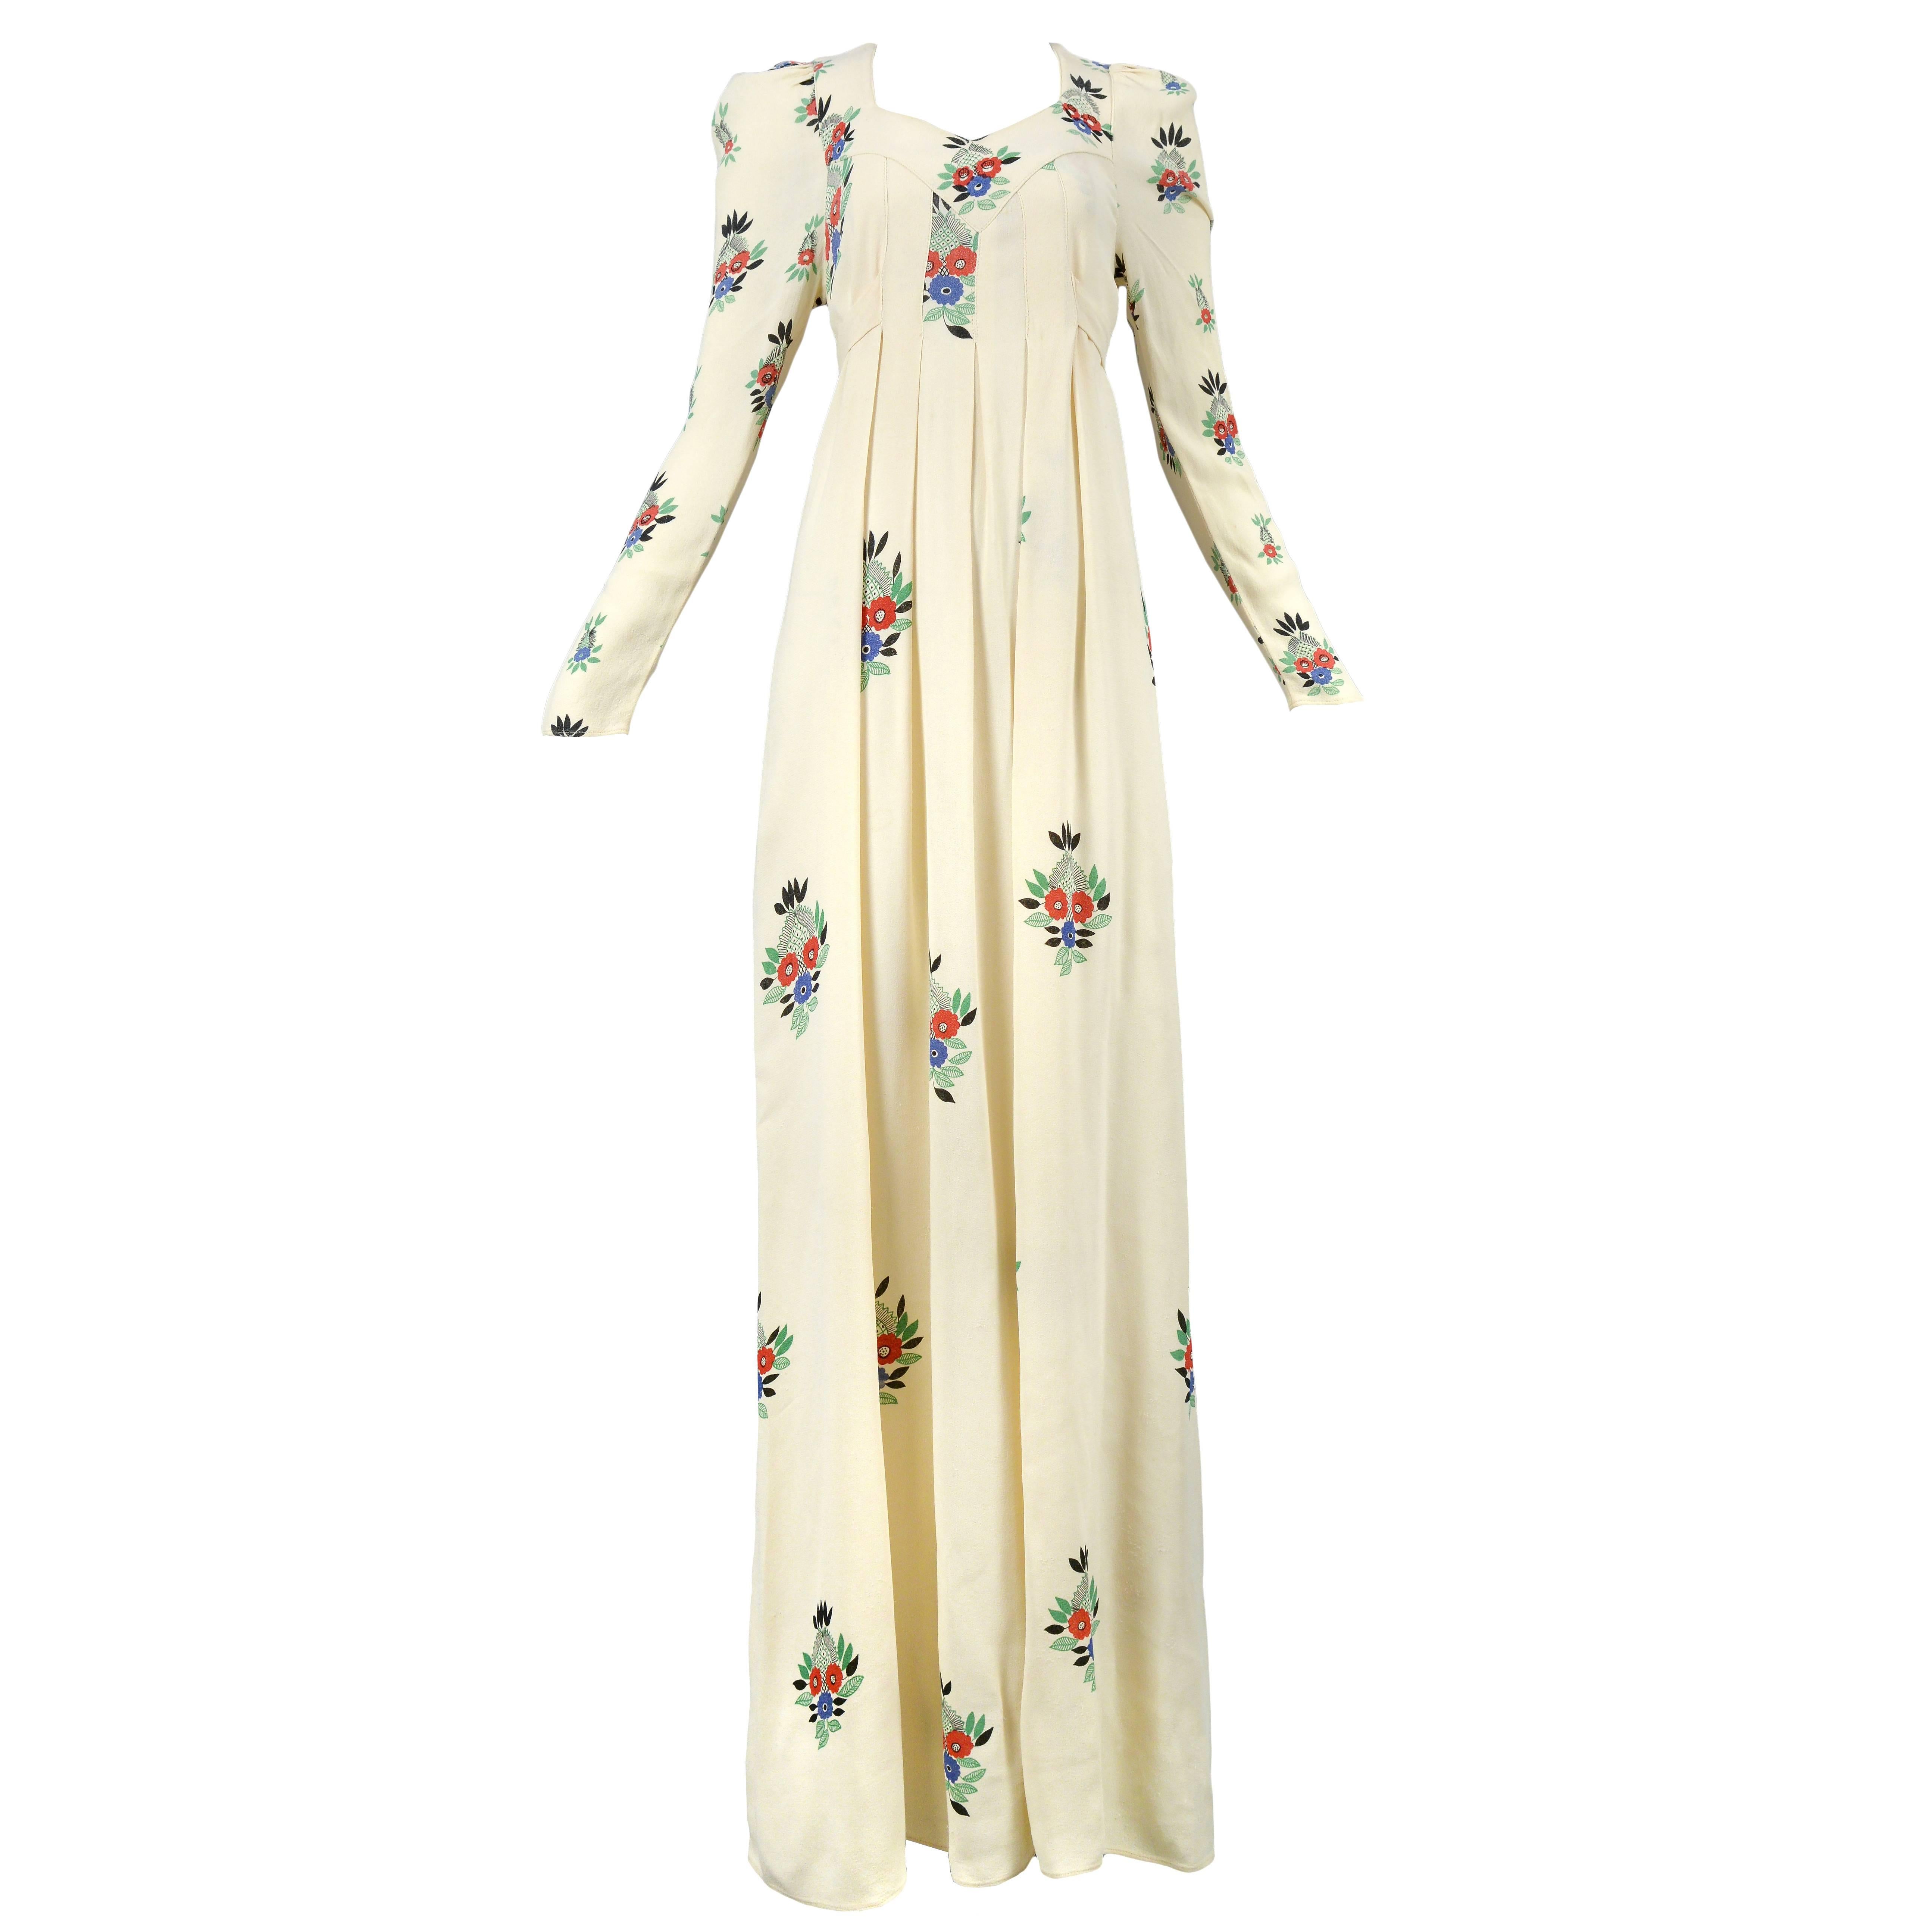 Ossie Clark Ivory Moss Crepe Gown with Floral Print by Celia Birtwell, 1970